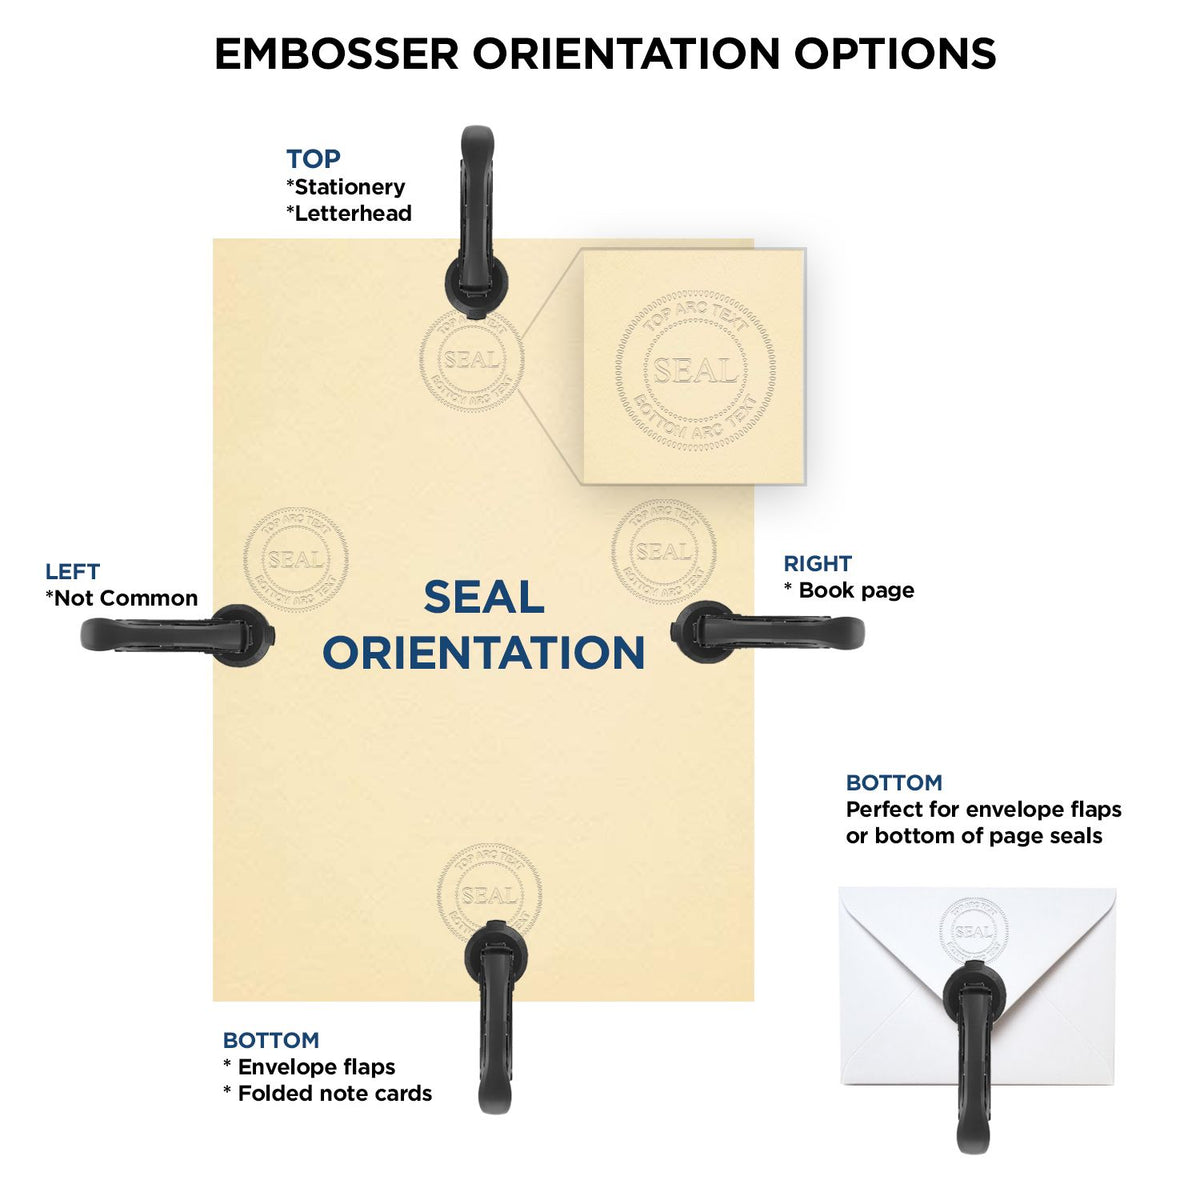 An infographic for the Handheld North Dakota Professional Geologist Embosser showing embosser orientation, this is showing examples of a top, bottom, right and left insert.